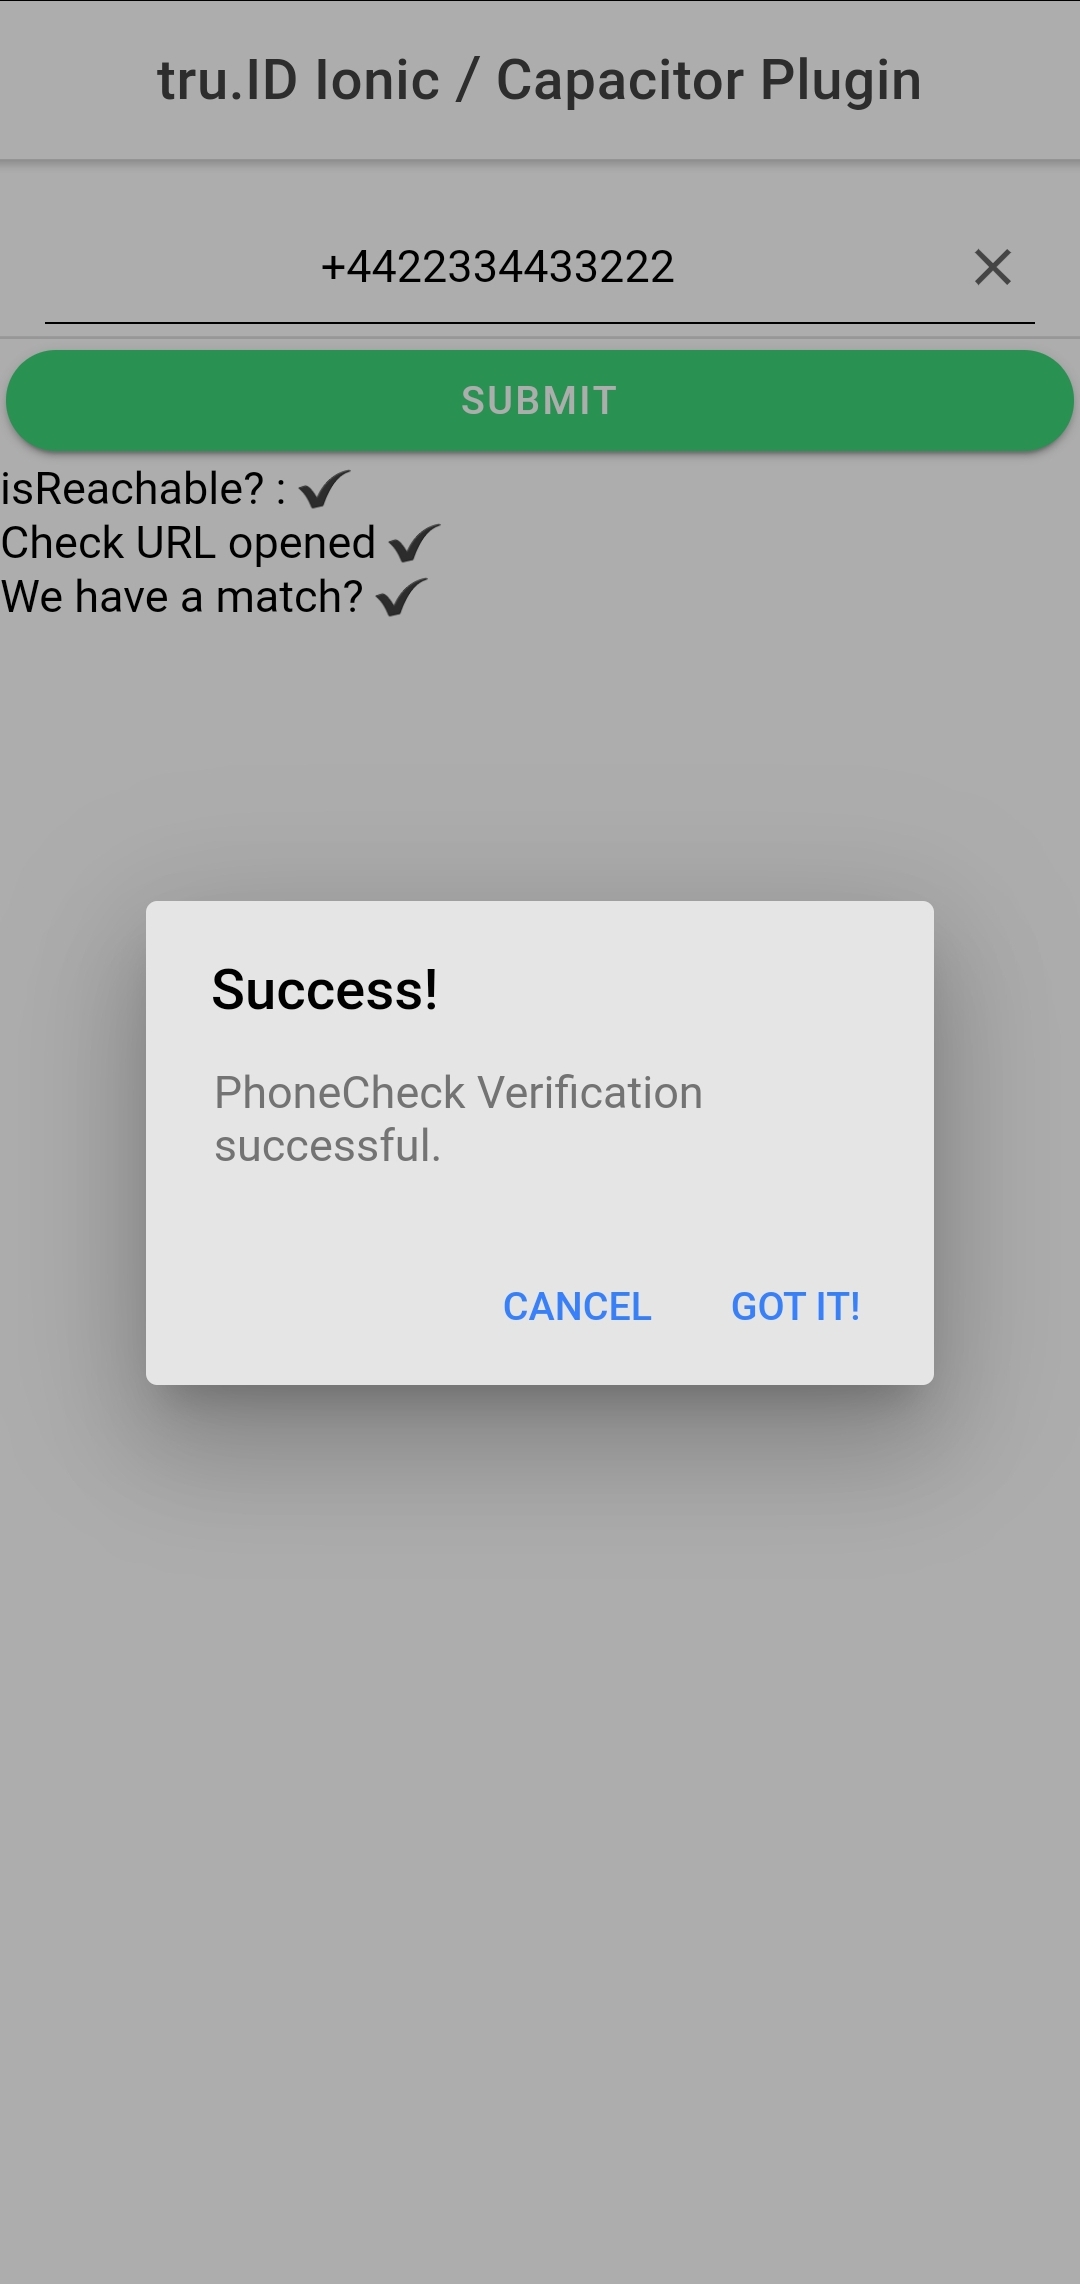 A screenshot of a mobile phone image containing a green button and a text input in a loading state with a text that says isReachable, a text that says check URL opened, a text that says we have a match and a modal